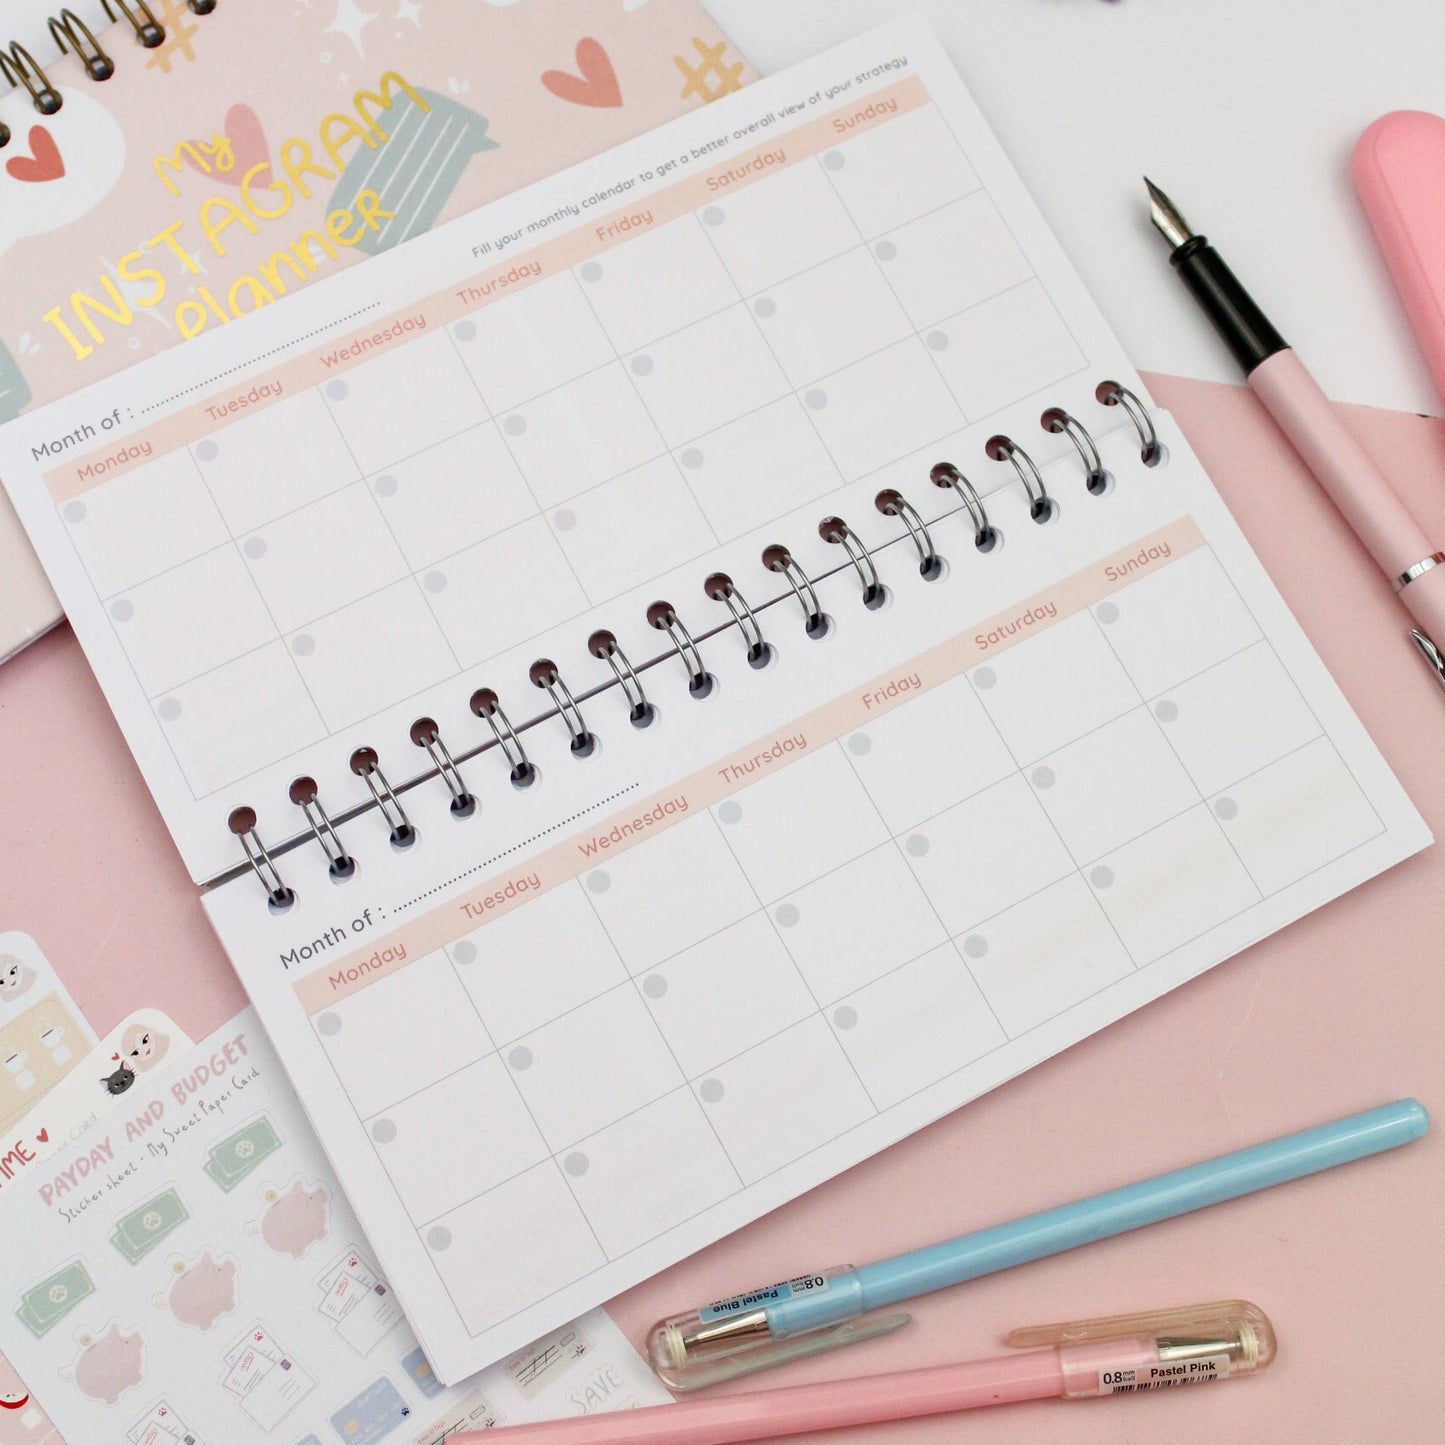 plan your whole month of social media content